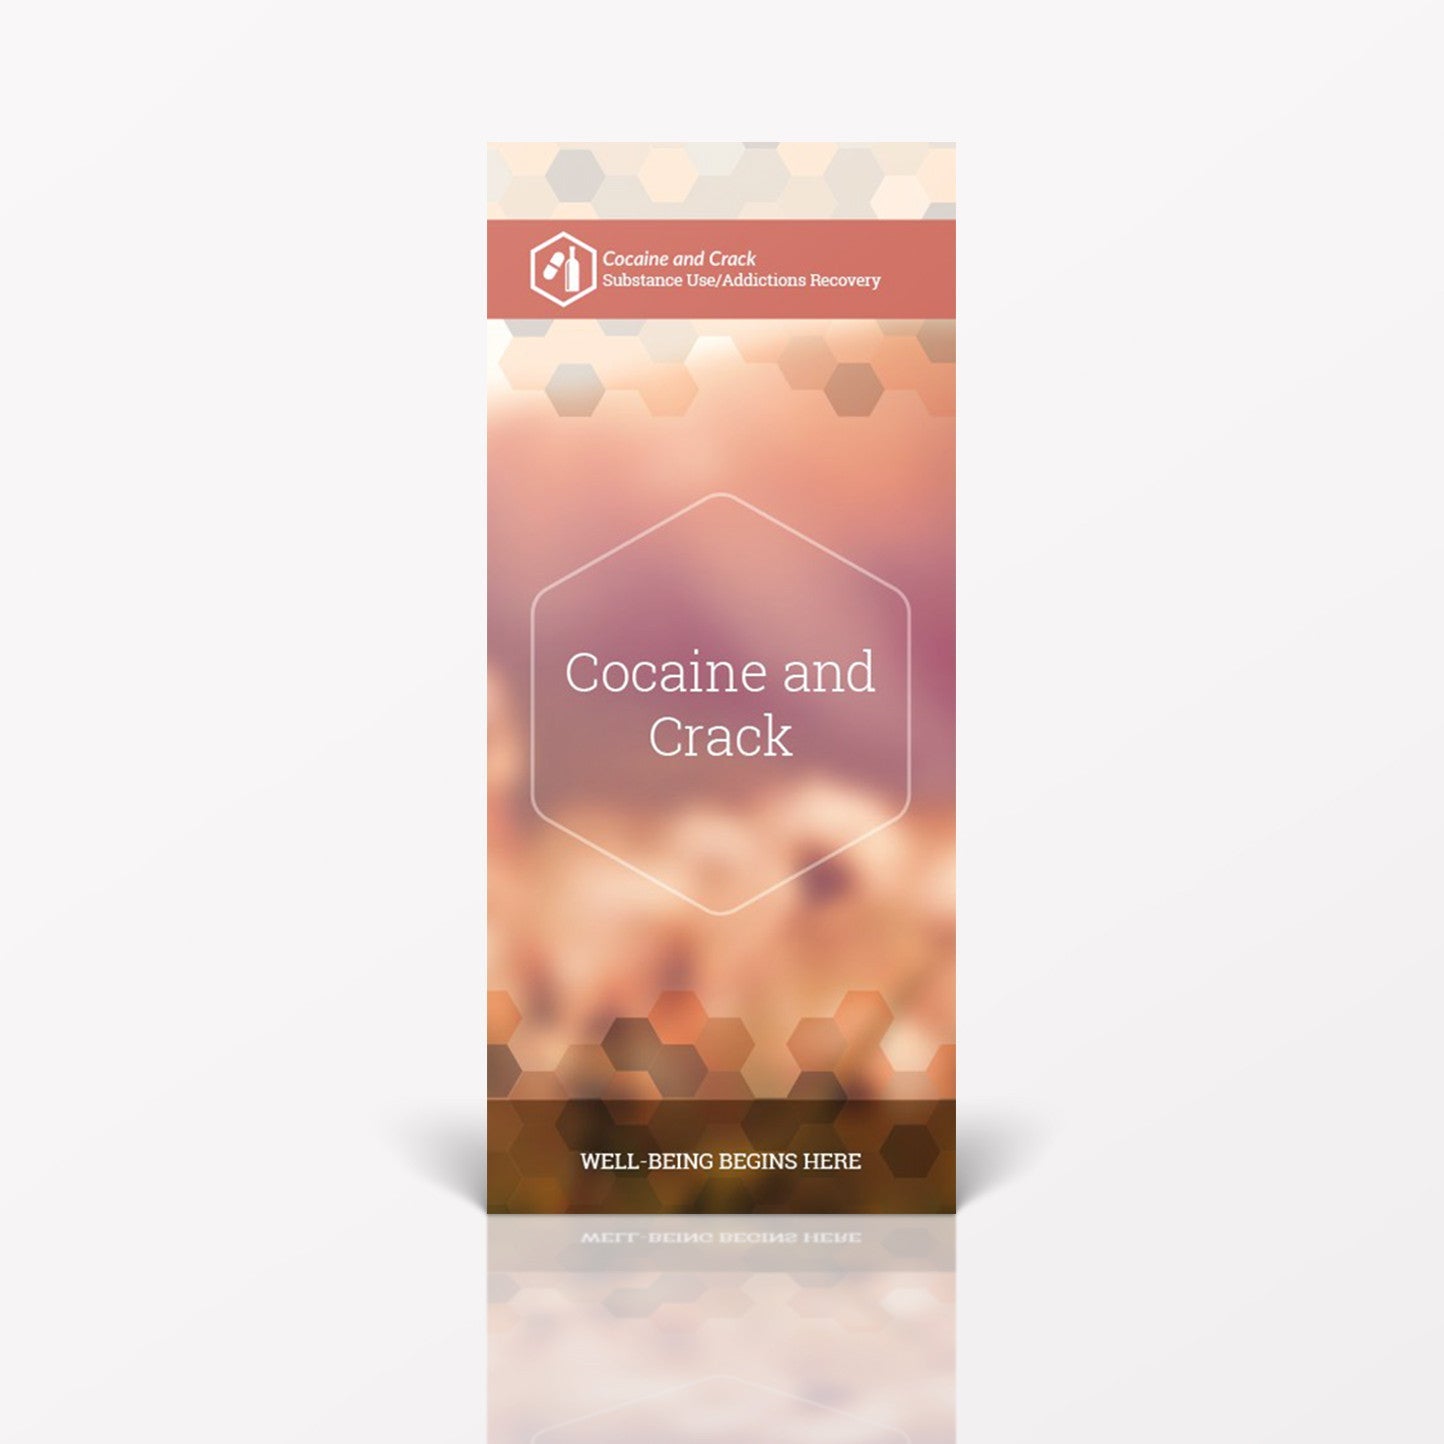 Cocaine and Crack pamphlet/brochure (6004S1)